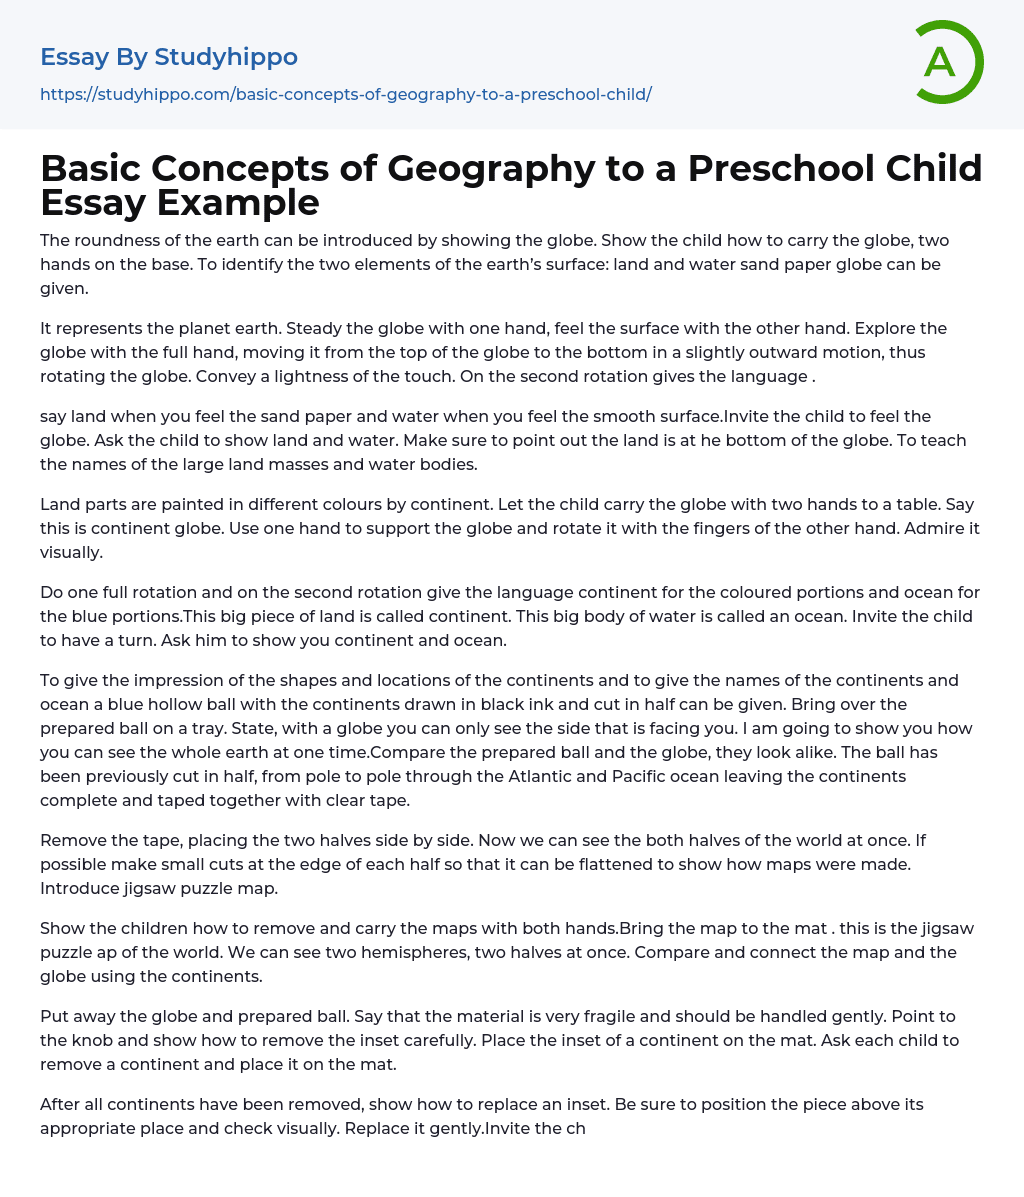 Basic Concepts of Geography to a Preschool Child Essay Example